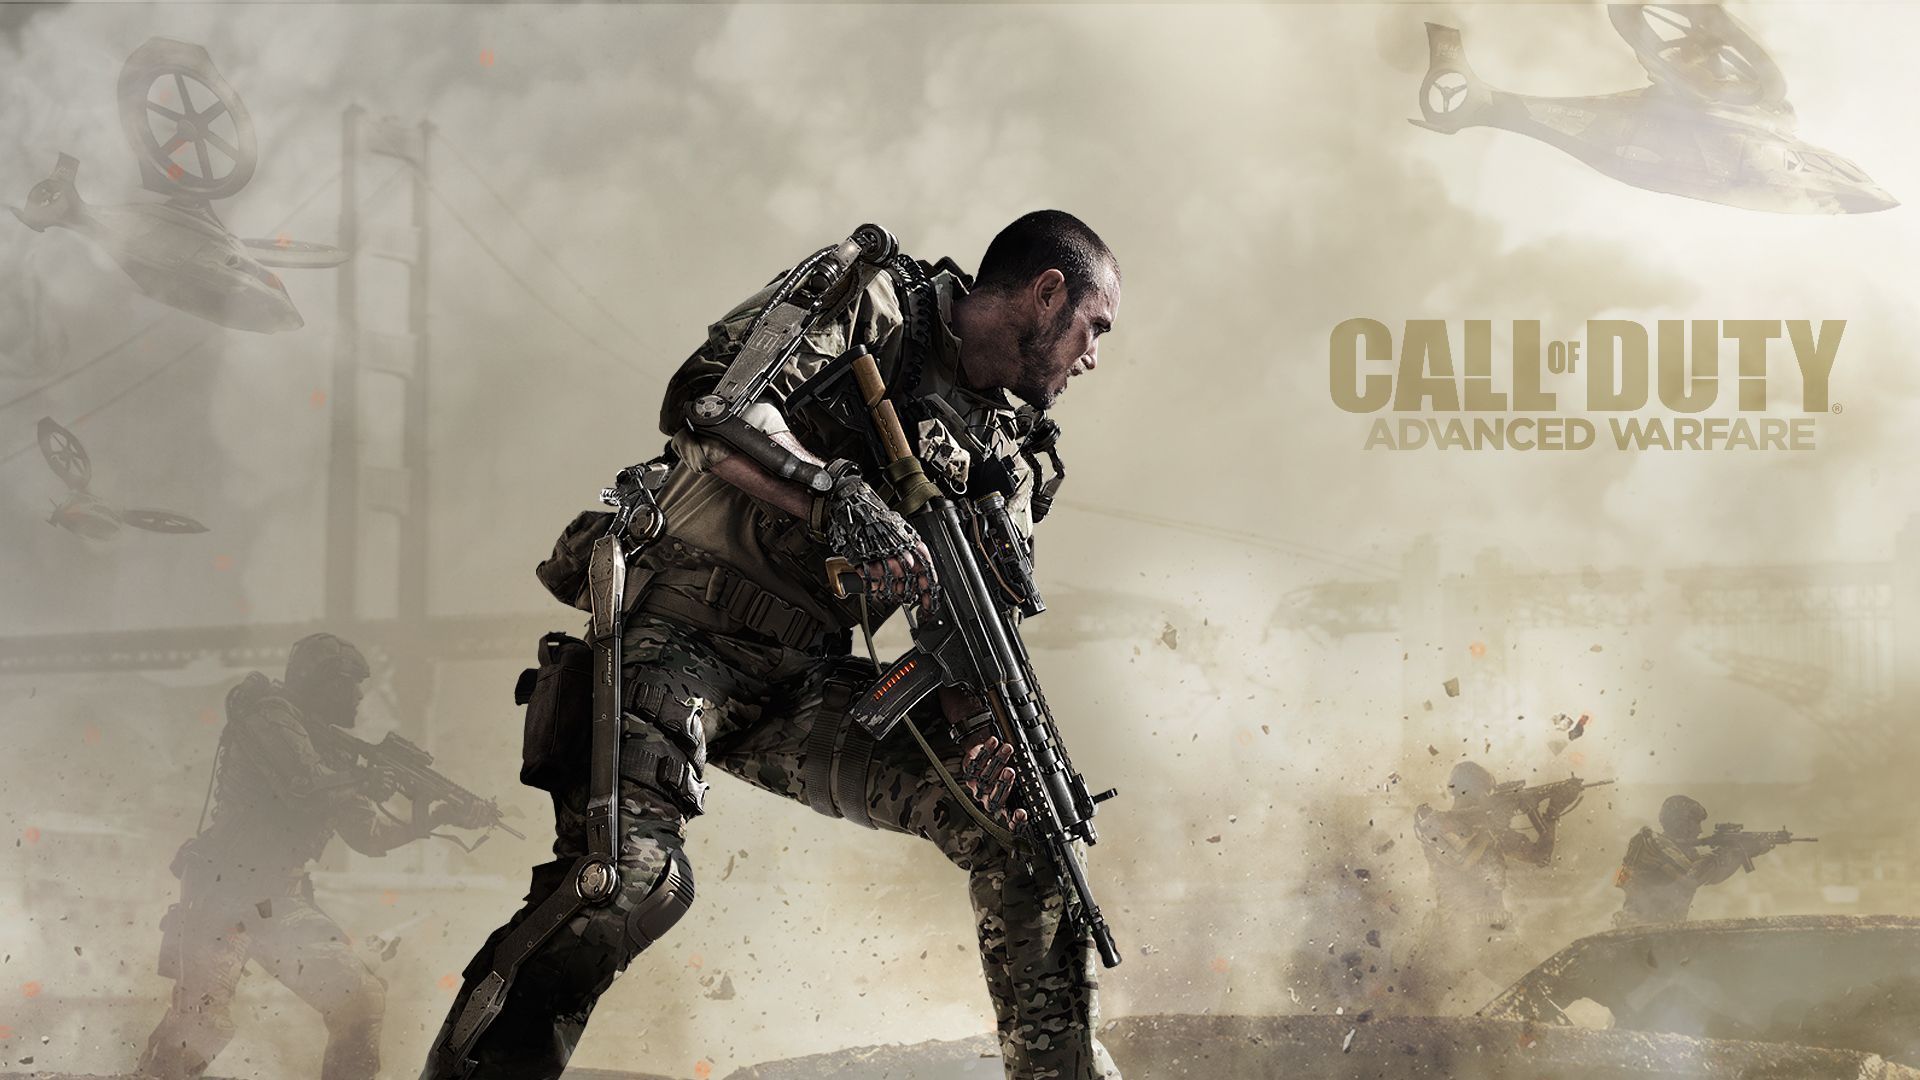 Call of Duty Advanced Warfare Wallpaper FREE Download - Unofficial ...